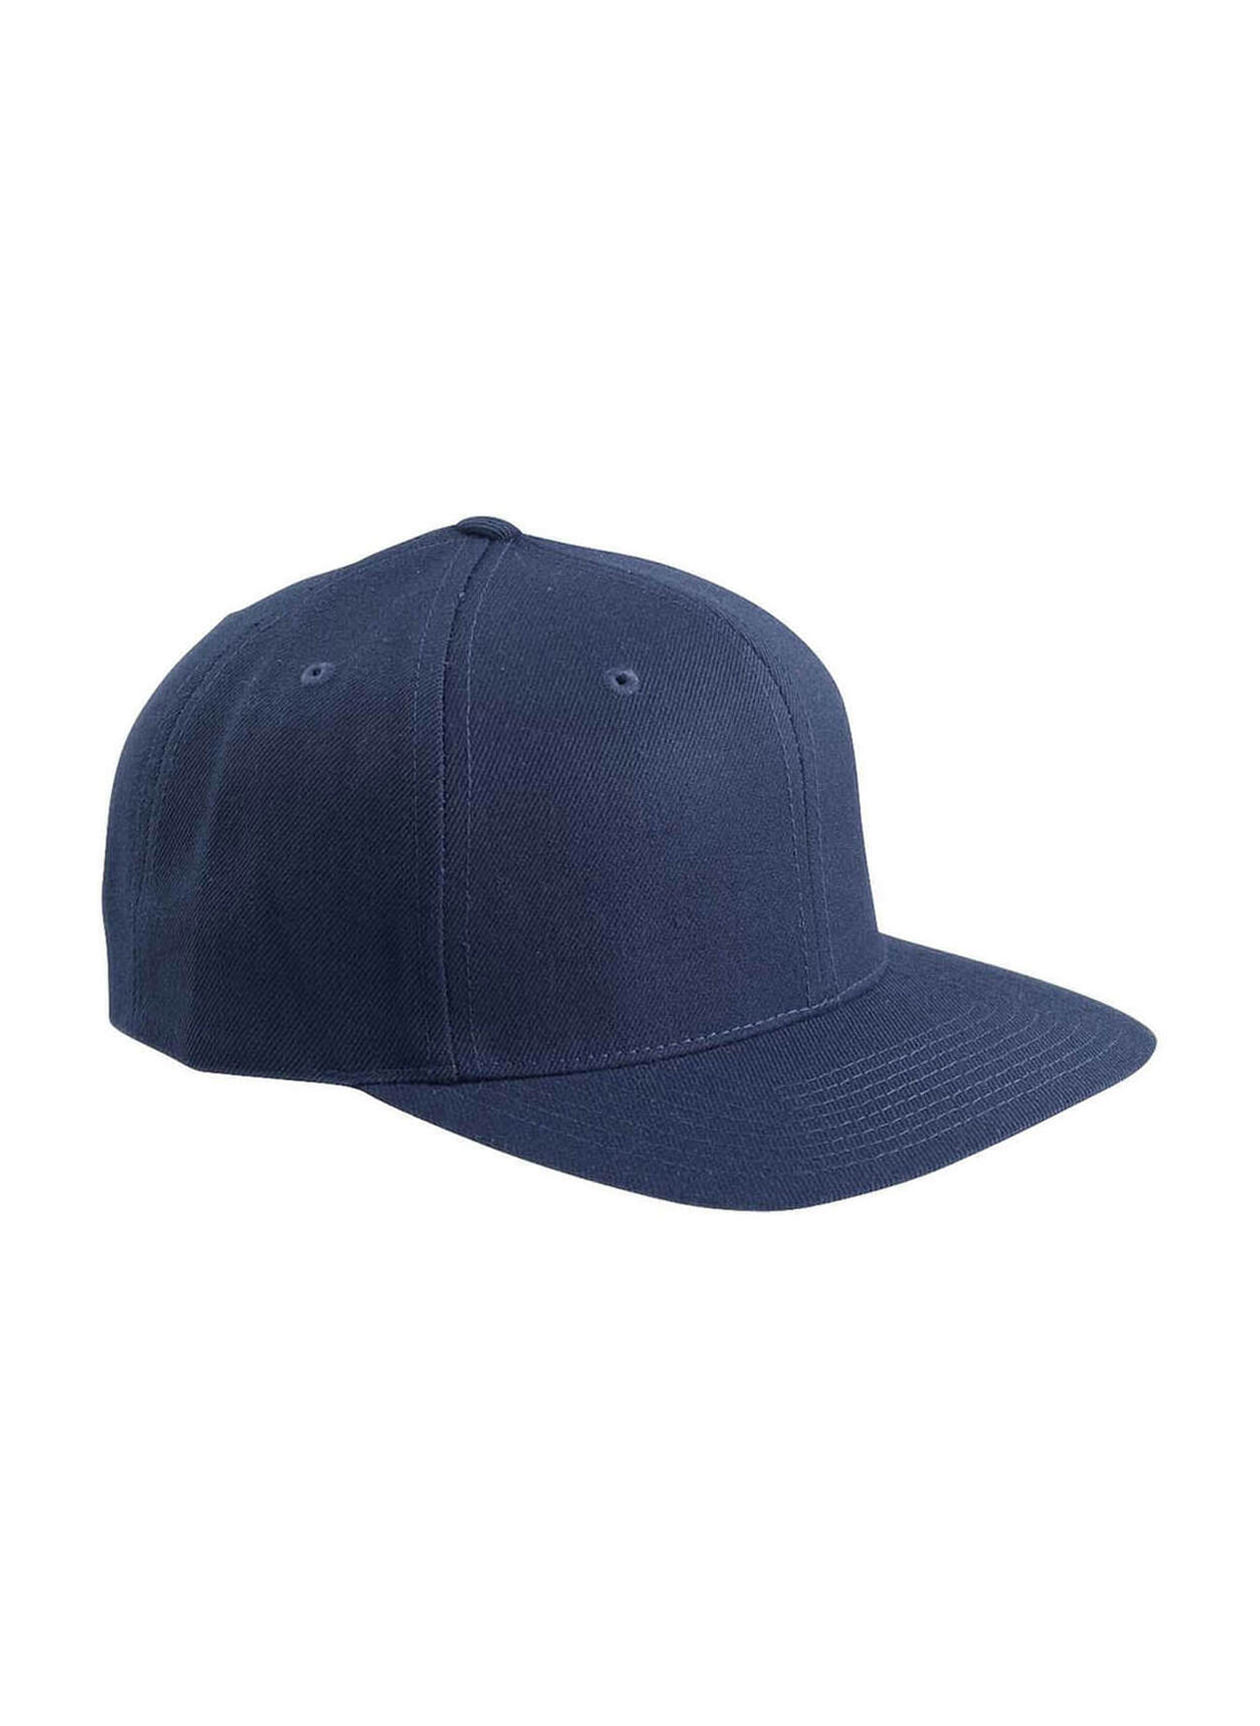 Yupoong Navy 6-Panel Structured Flat Visor Classic Snapback Hat